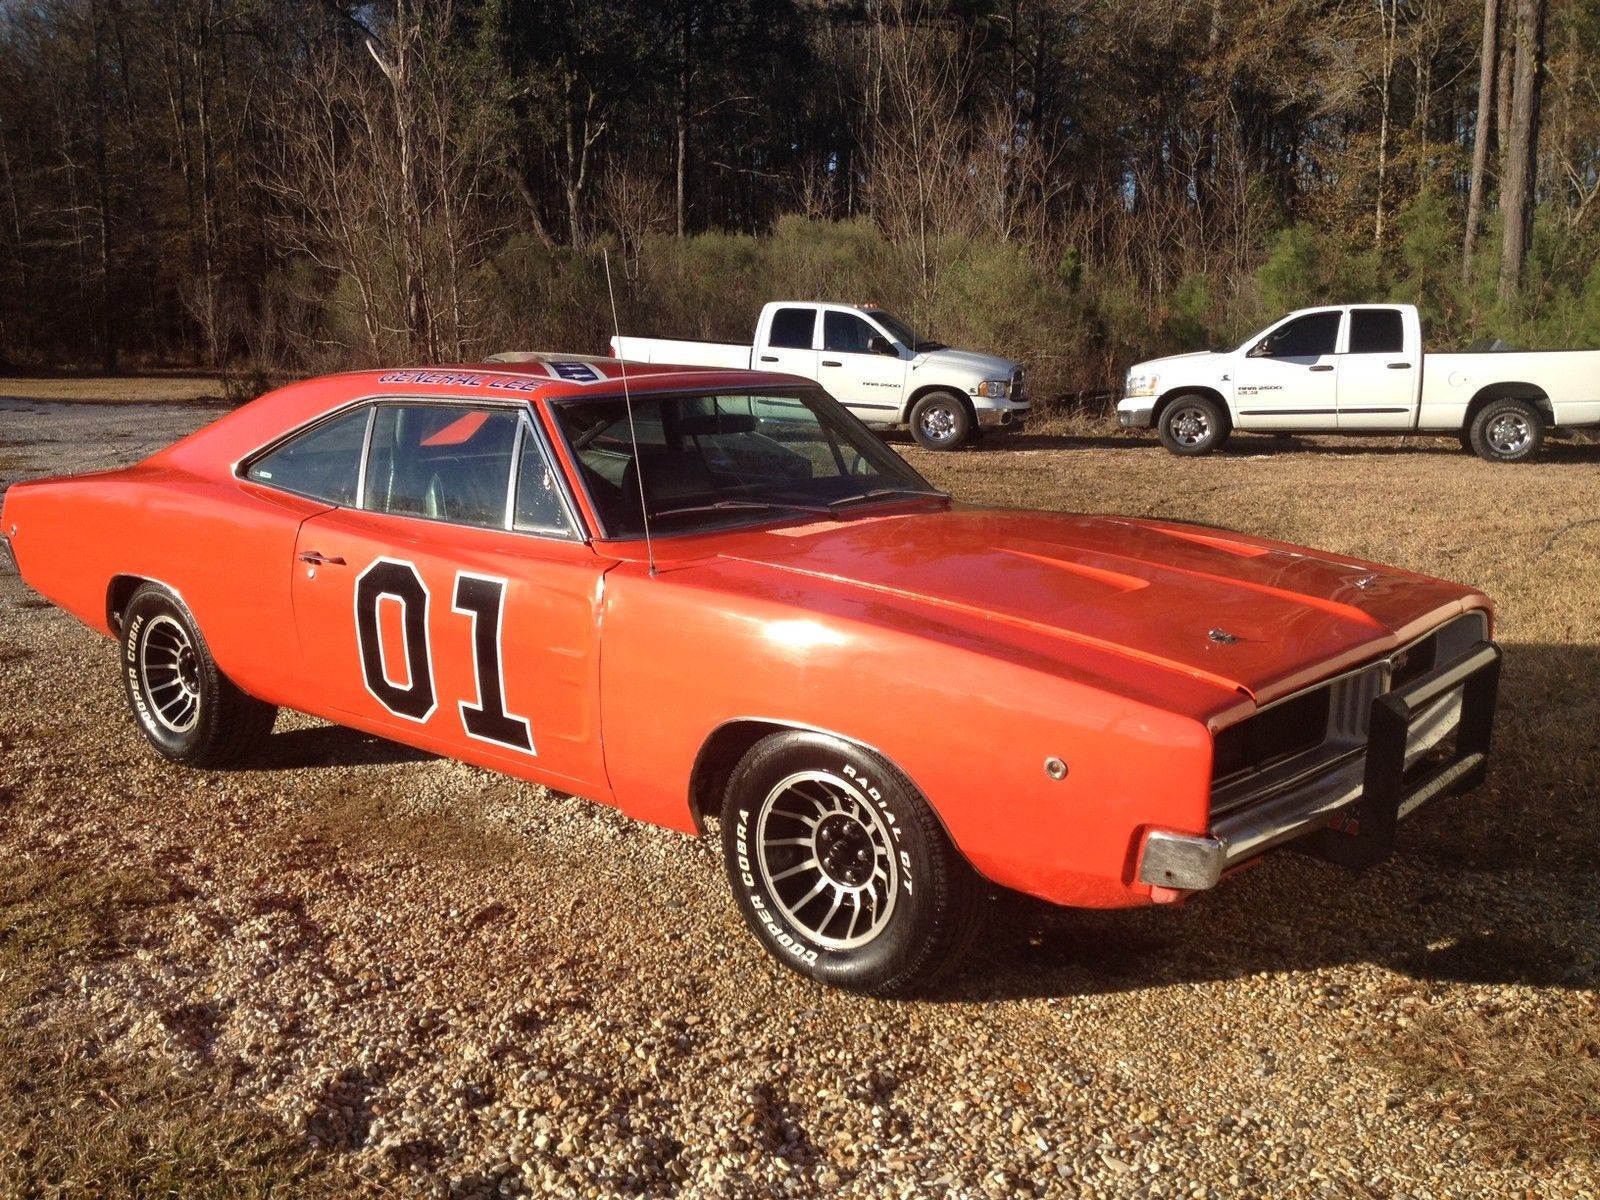 general, Lee, Dukes, Hazzard, Dodge, Charger, Muscle, Hot, Rod, Rods, Television, Series Wallpaper